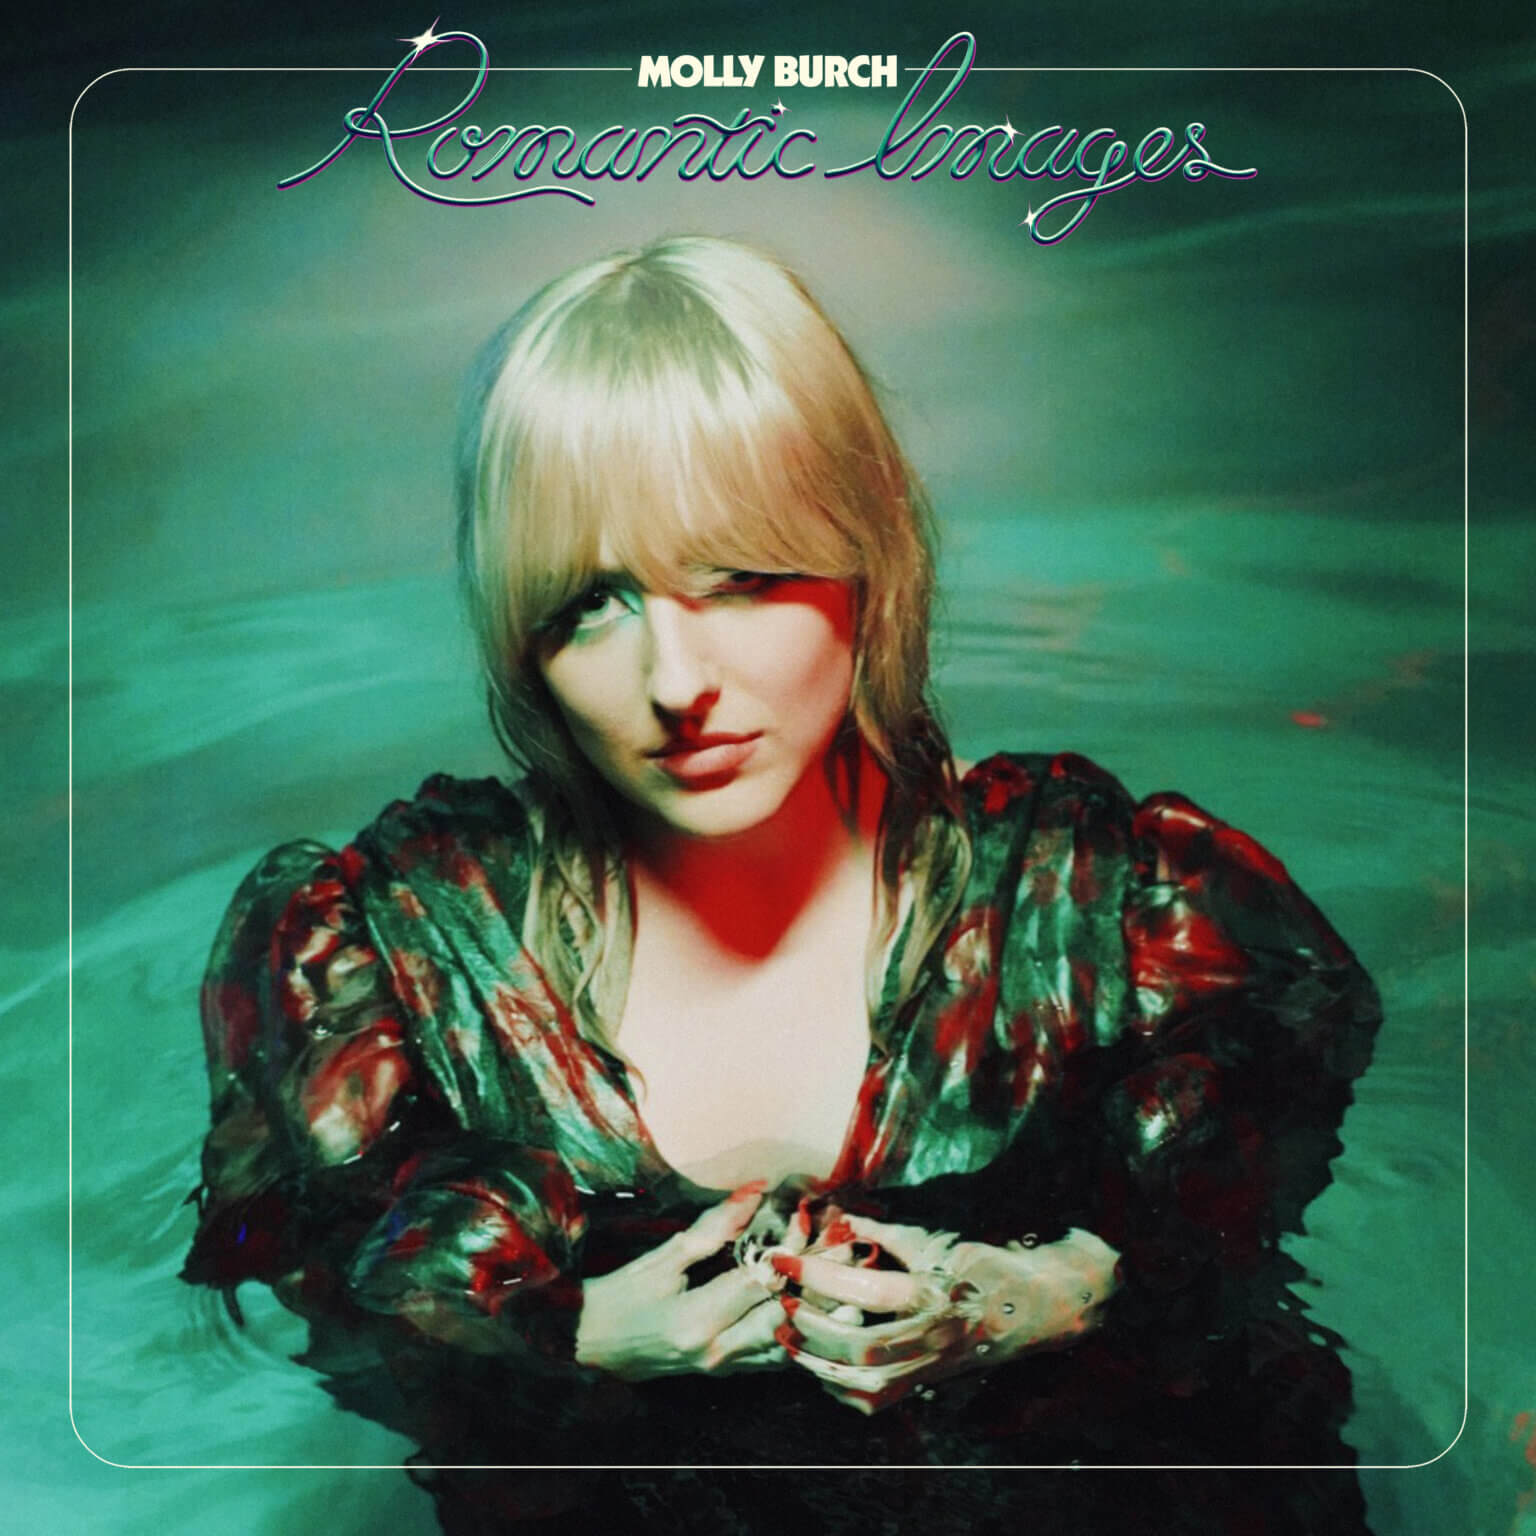 Singer/songwriter Molly Burch announces the release of her fourth studio album Romantic Images, out July 23rd via Captured Tracks